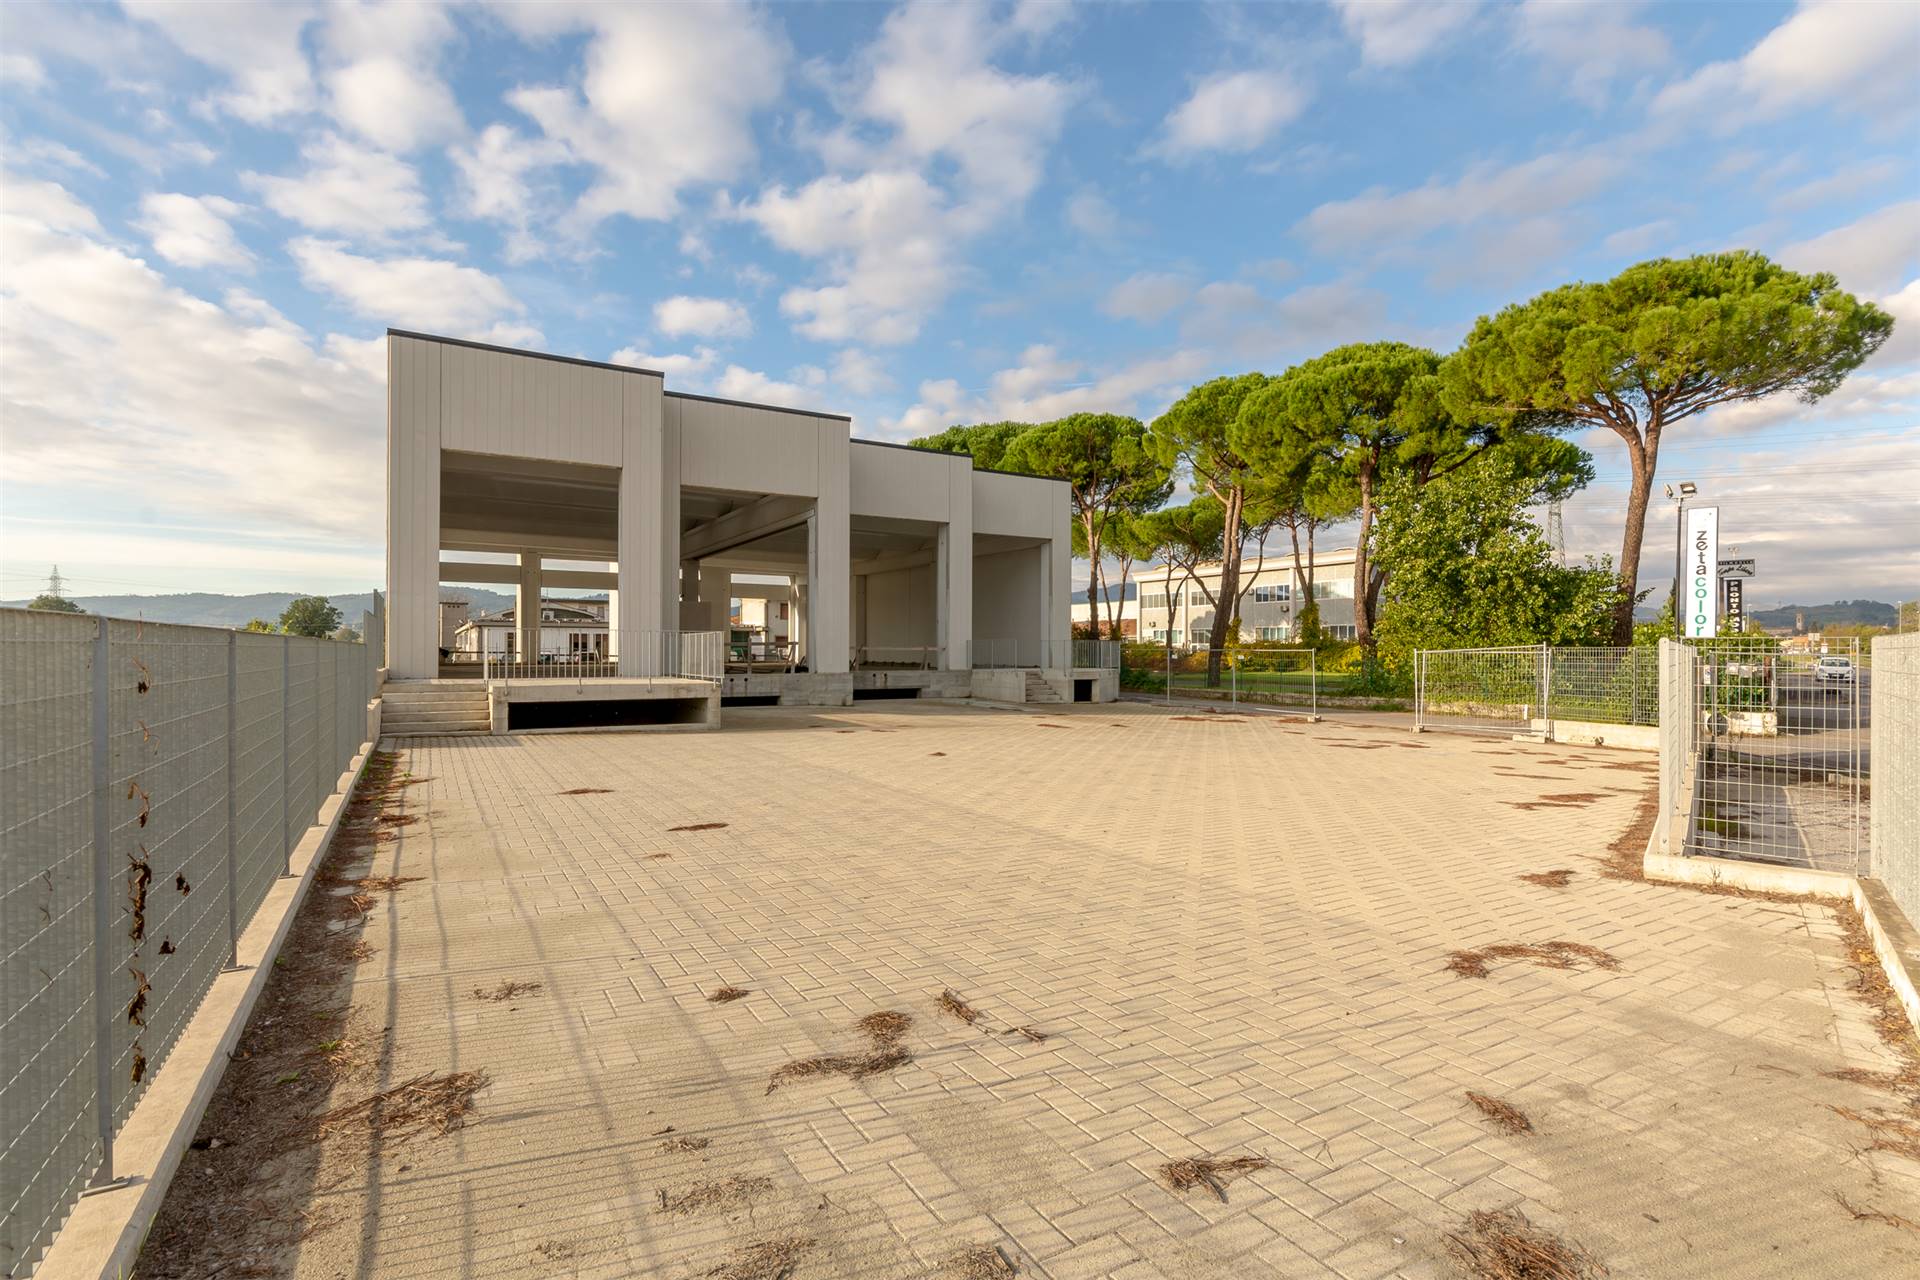 SANTANGELO A LECORE, SIGNA, Industrial warehouse for sale of 181 Sq. mt., New construction, Heating Individual heating system, Energetic class: A, 